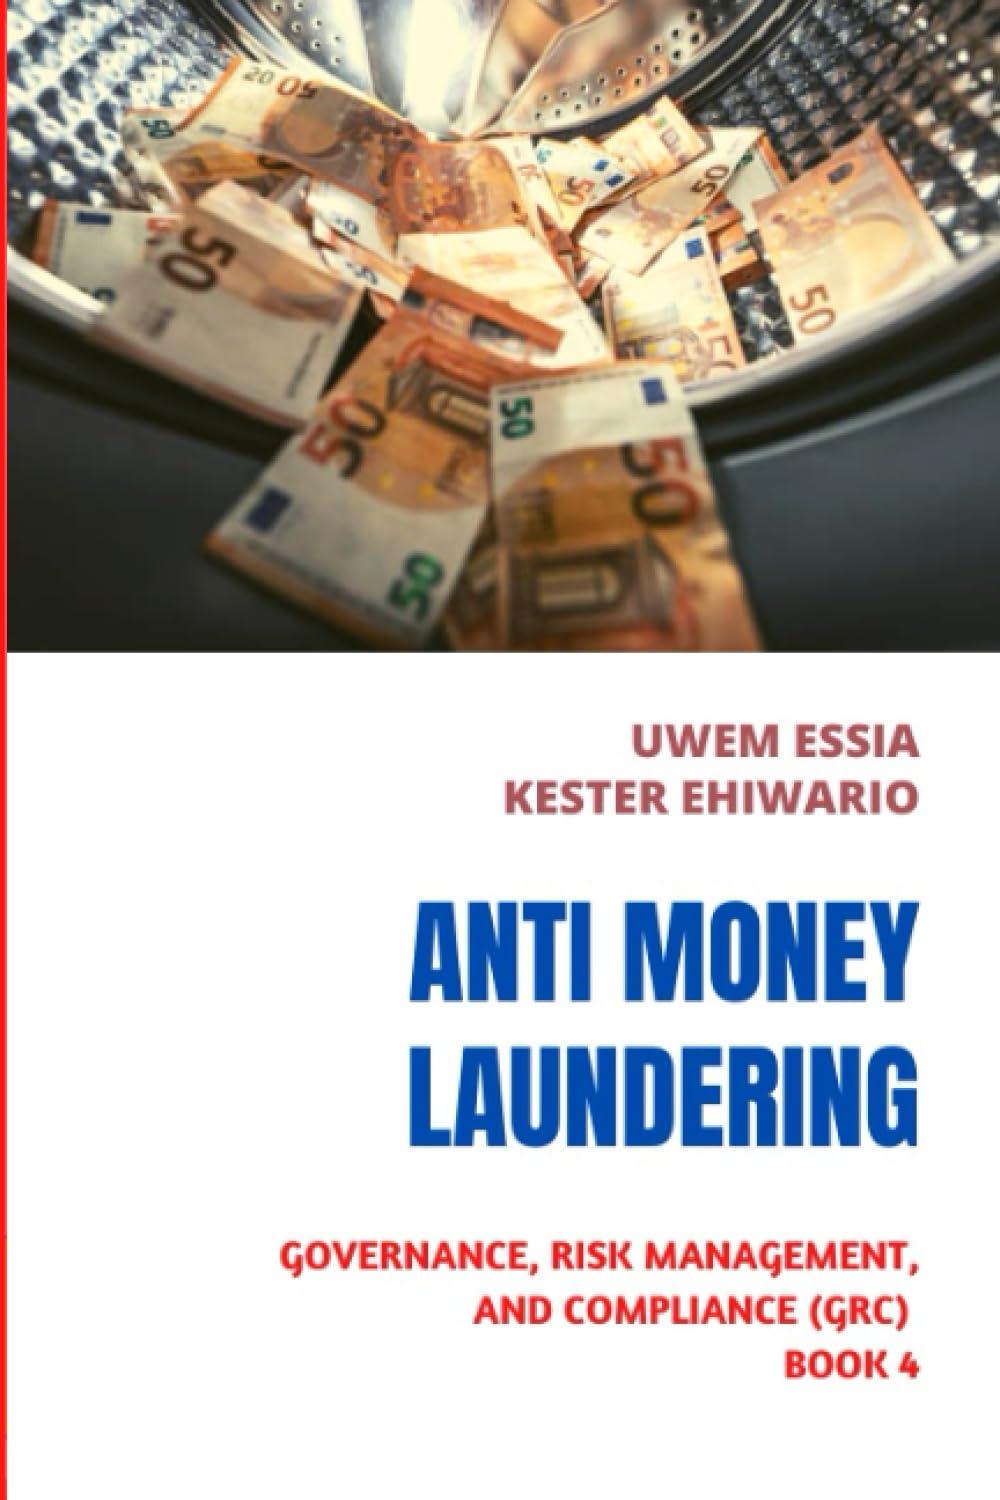 anti money laundering governance risk management and compliance grc book 4 1st edition uwem essia, kester